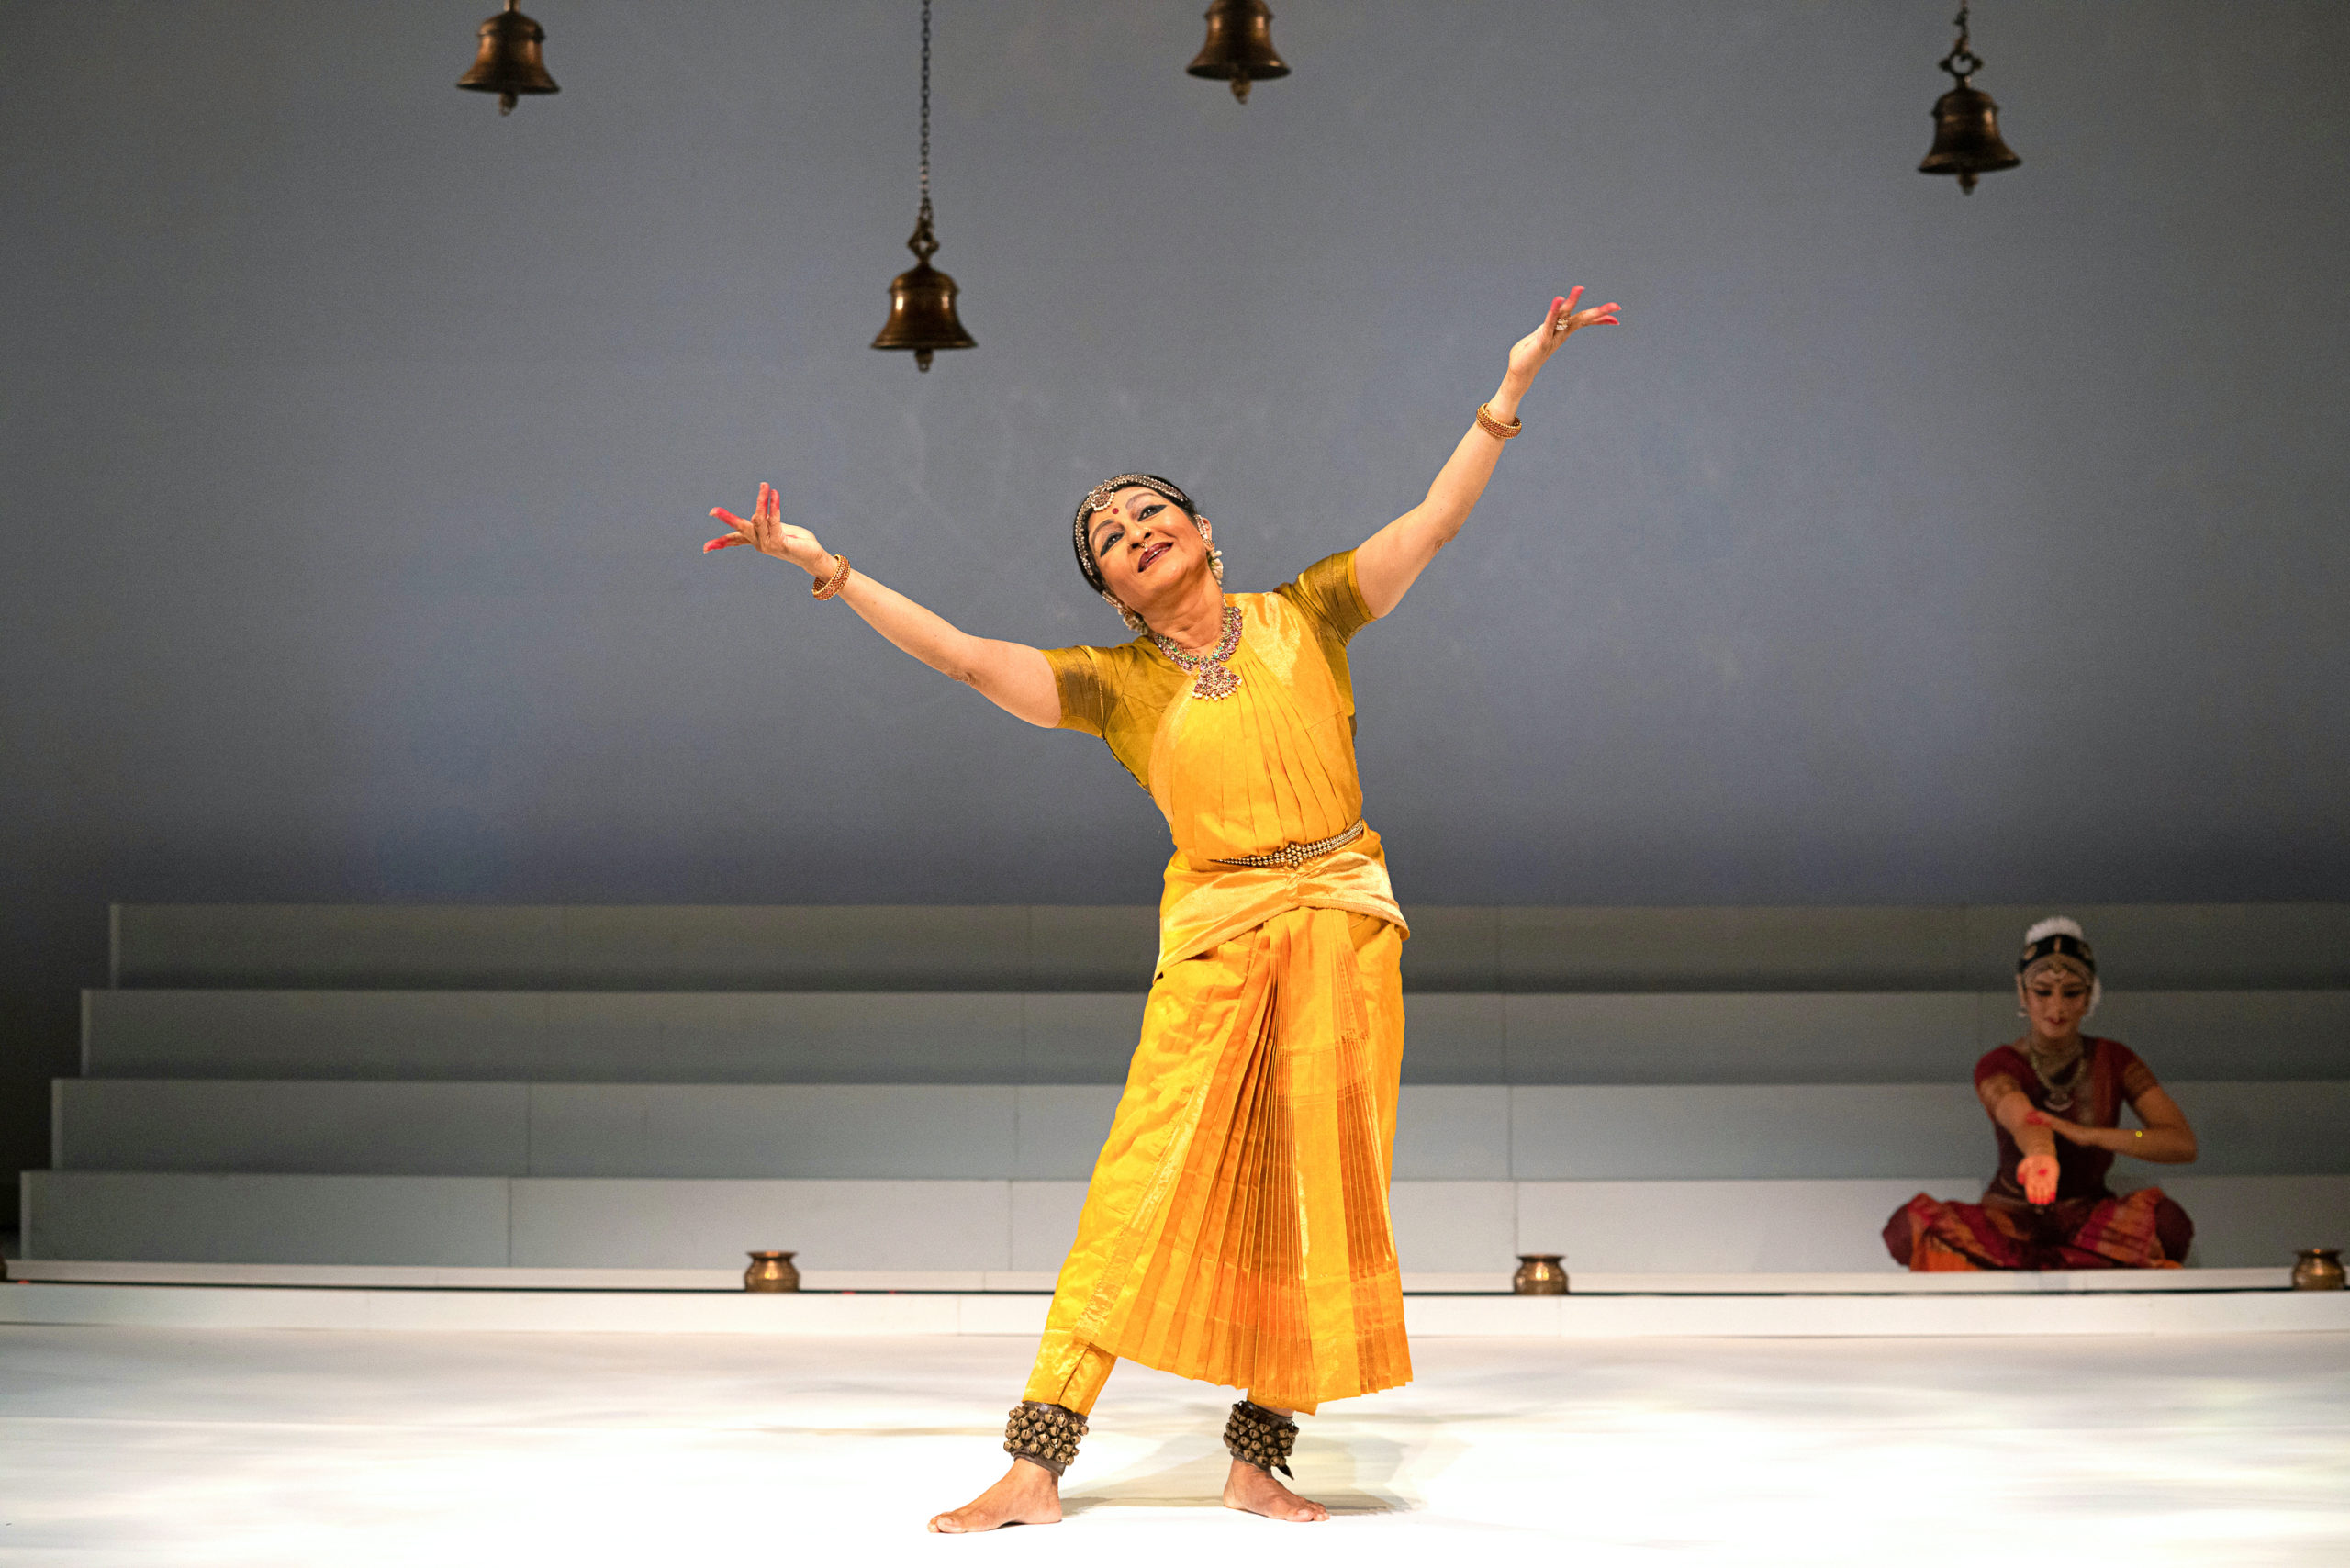 woman wearing yellow dress dancing on stage